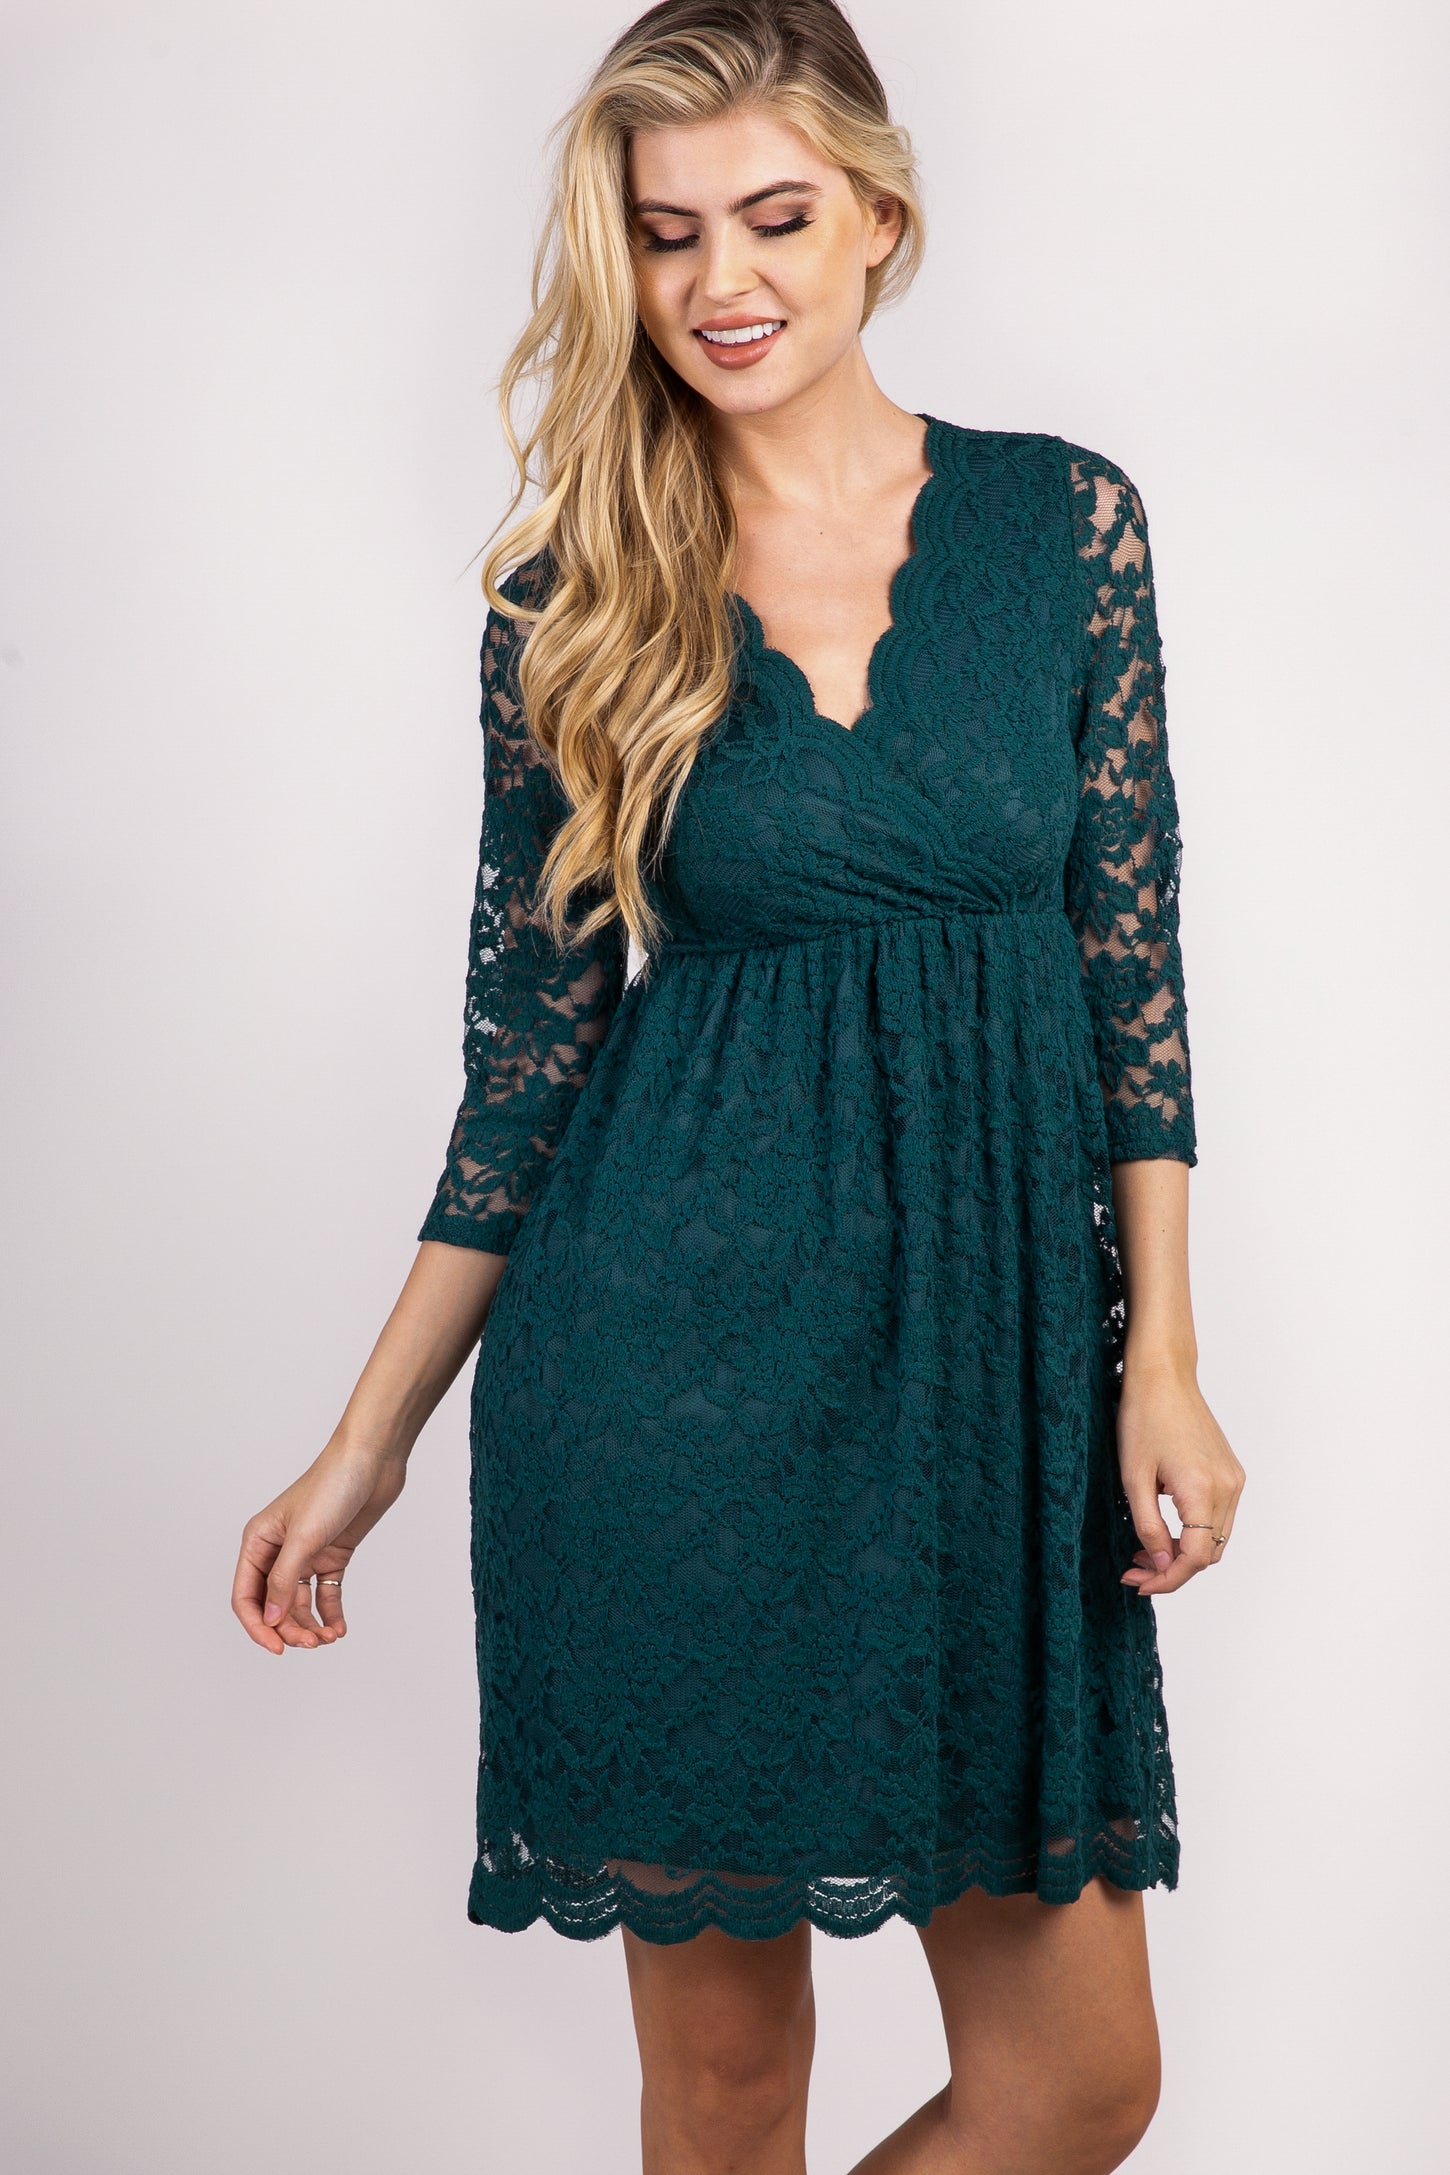 Forest Dress– Wrap Overlay Lace PinkBlush Green